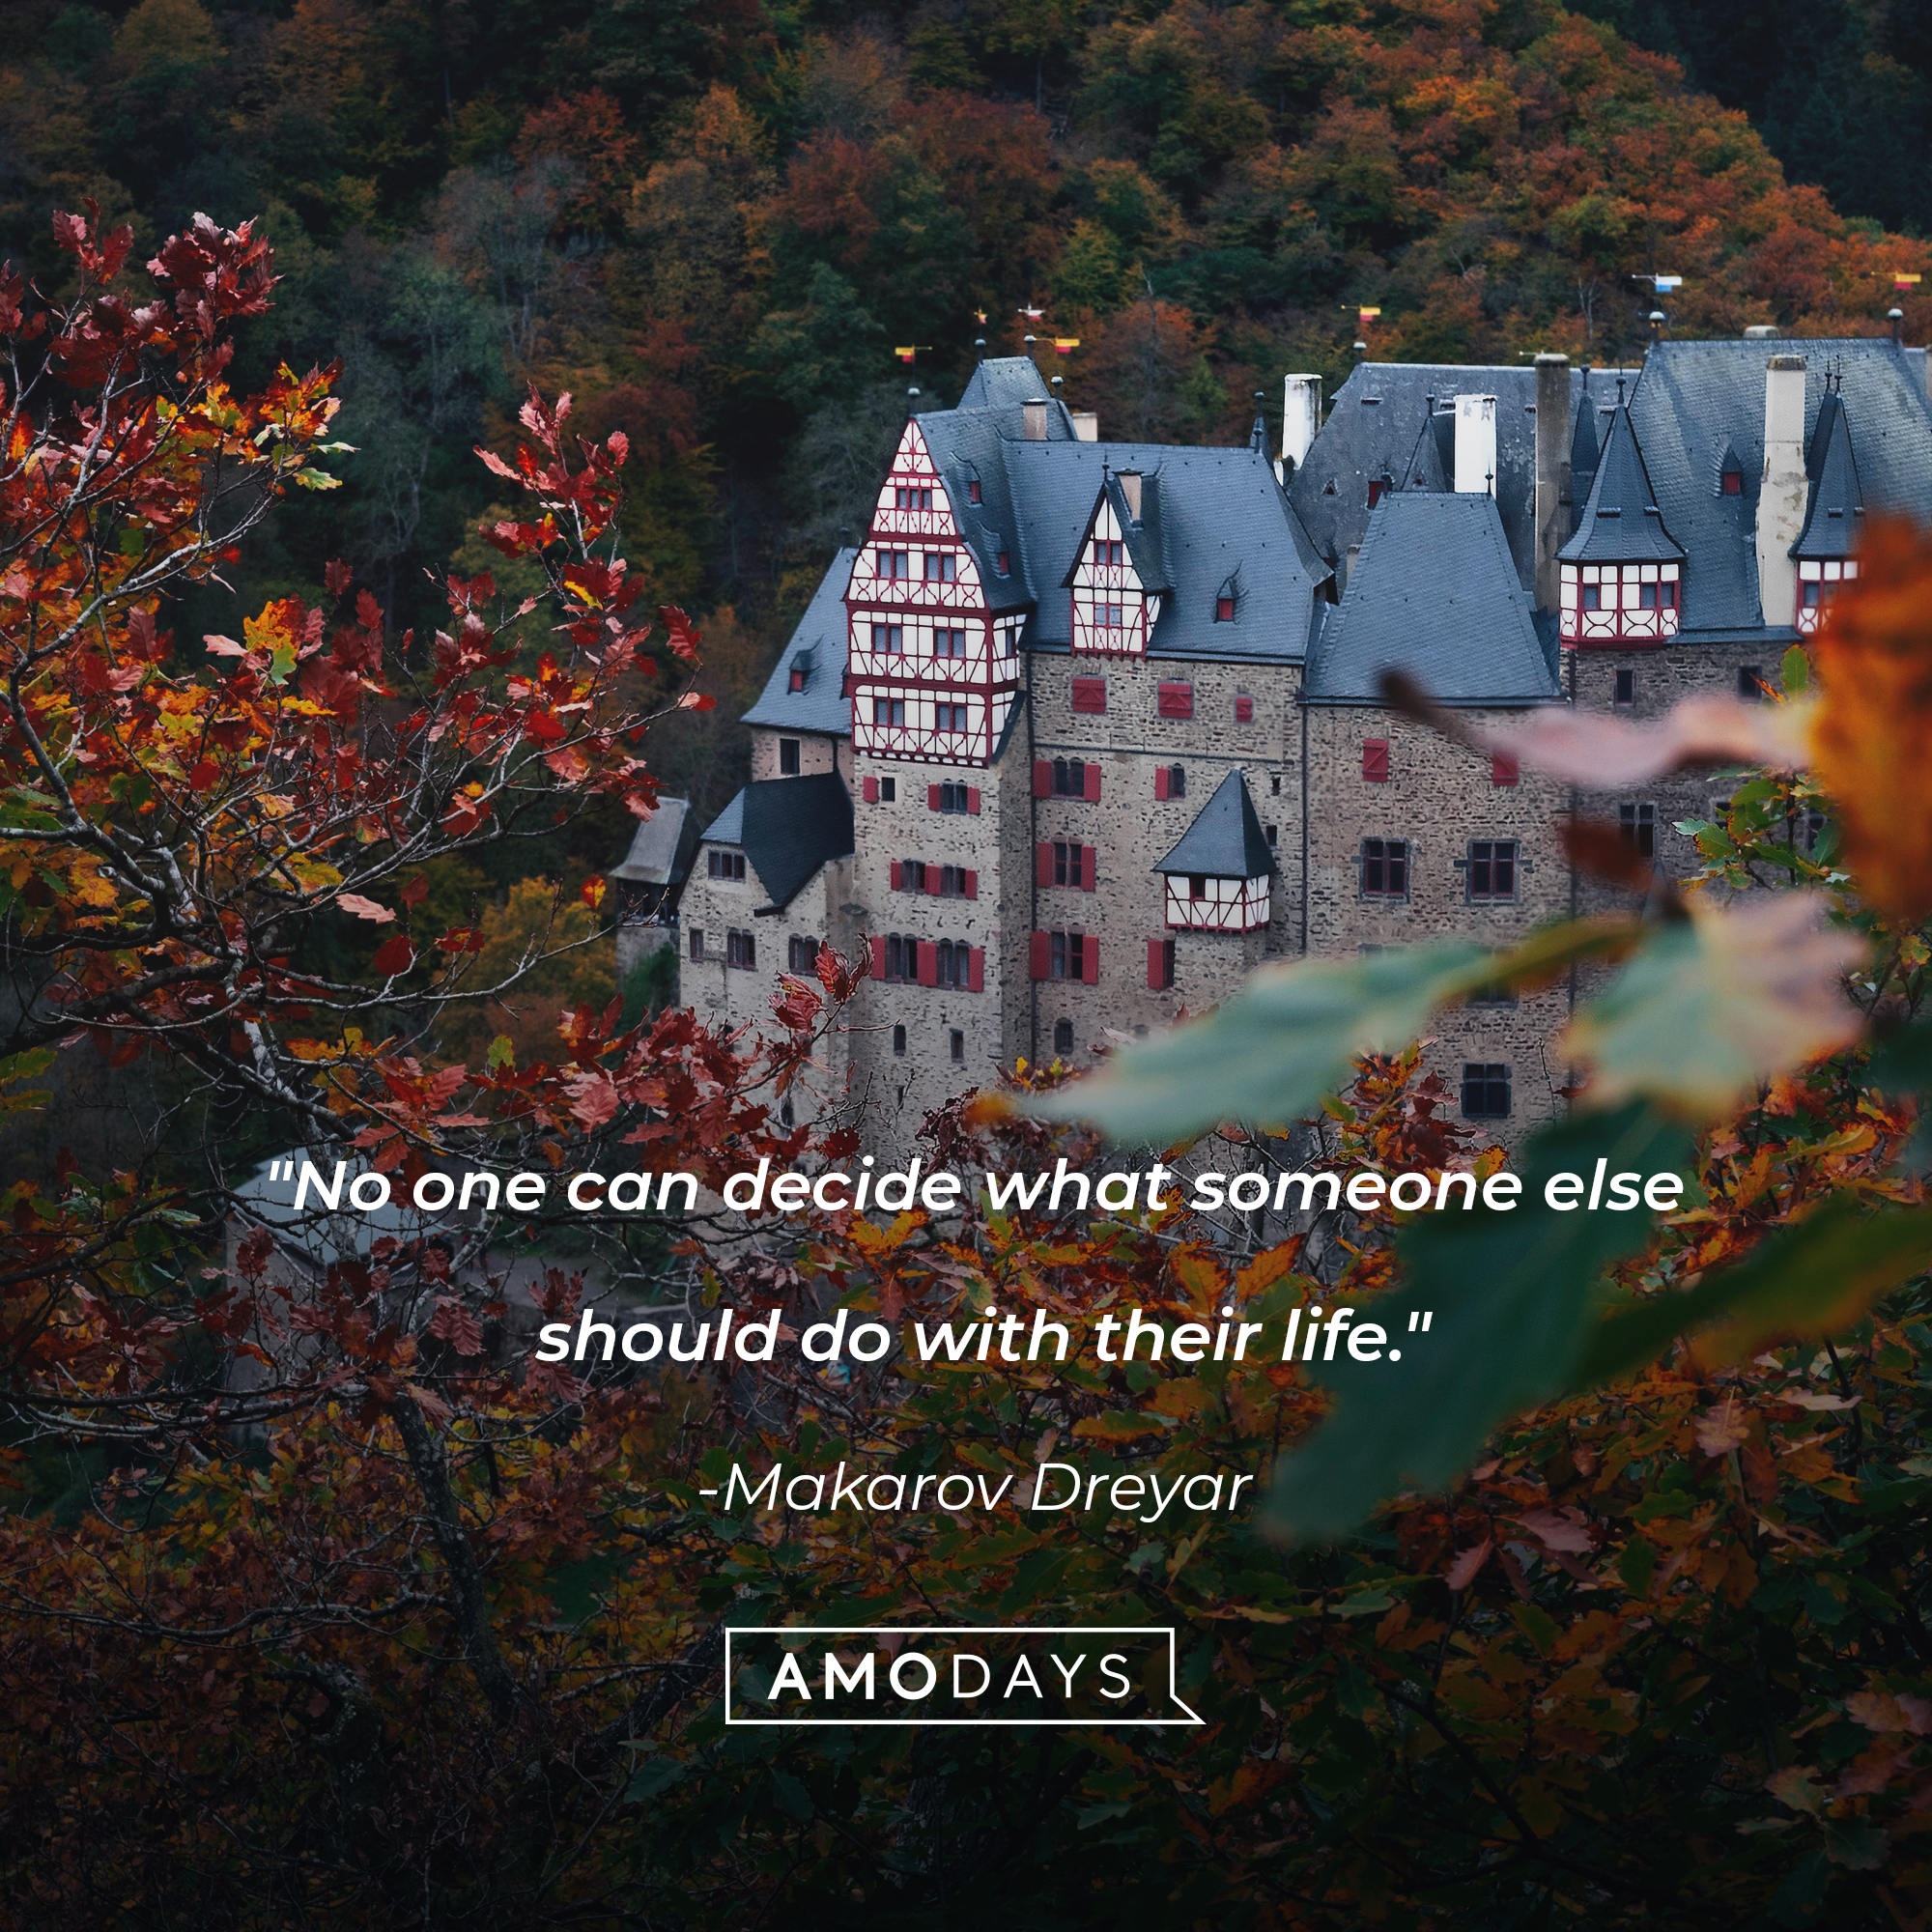 Makarov Dreyar's quote: "No one can decide what someone else should do with their life." | Image: Unsplash